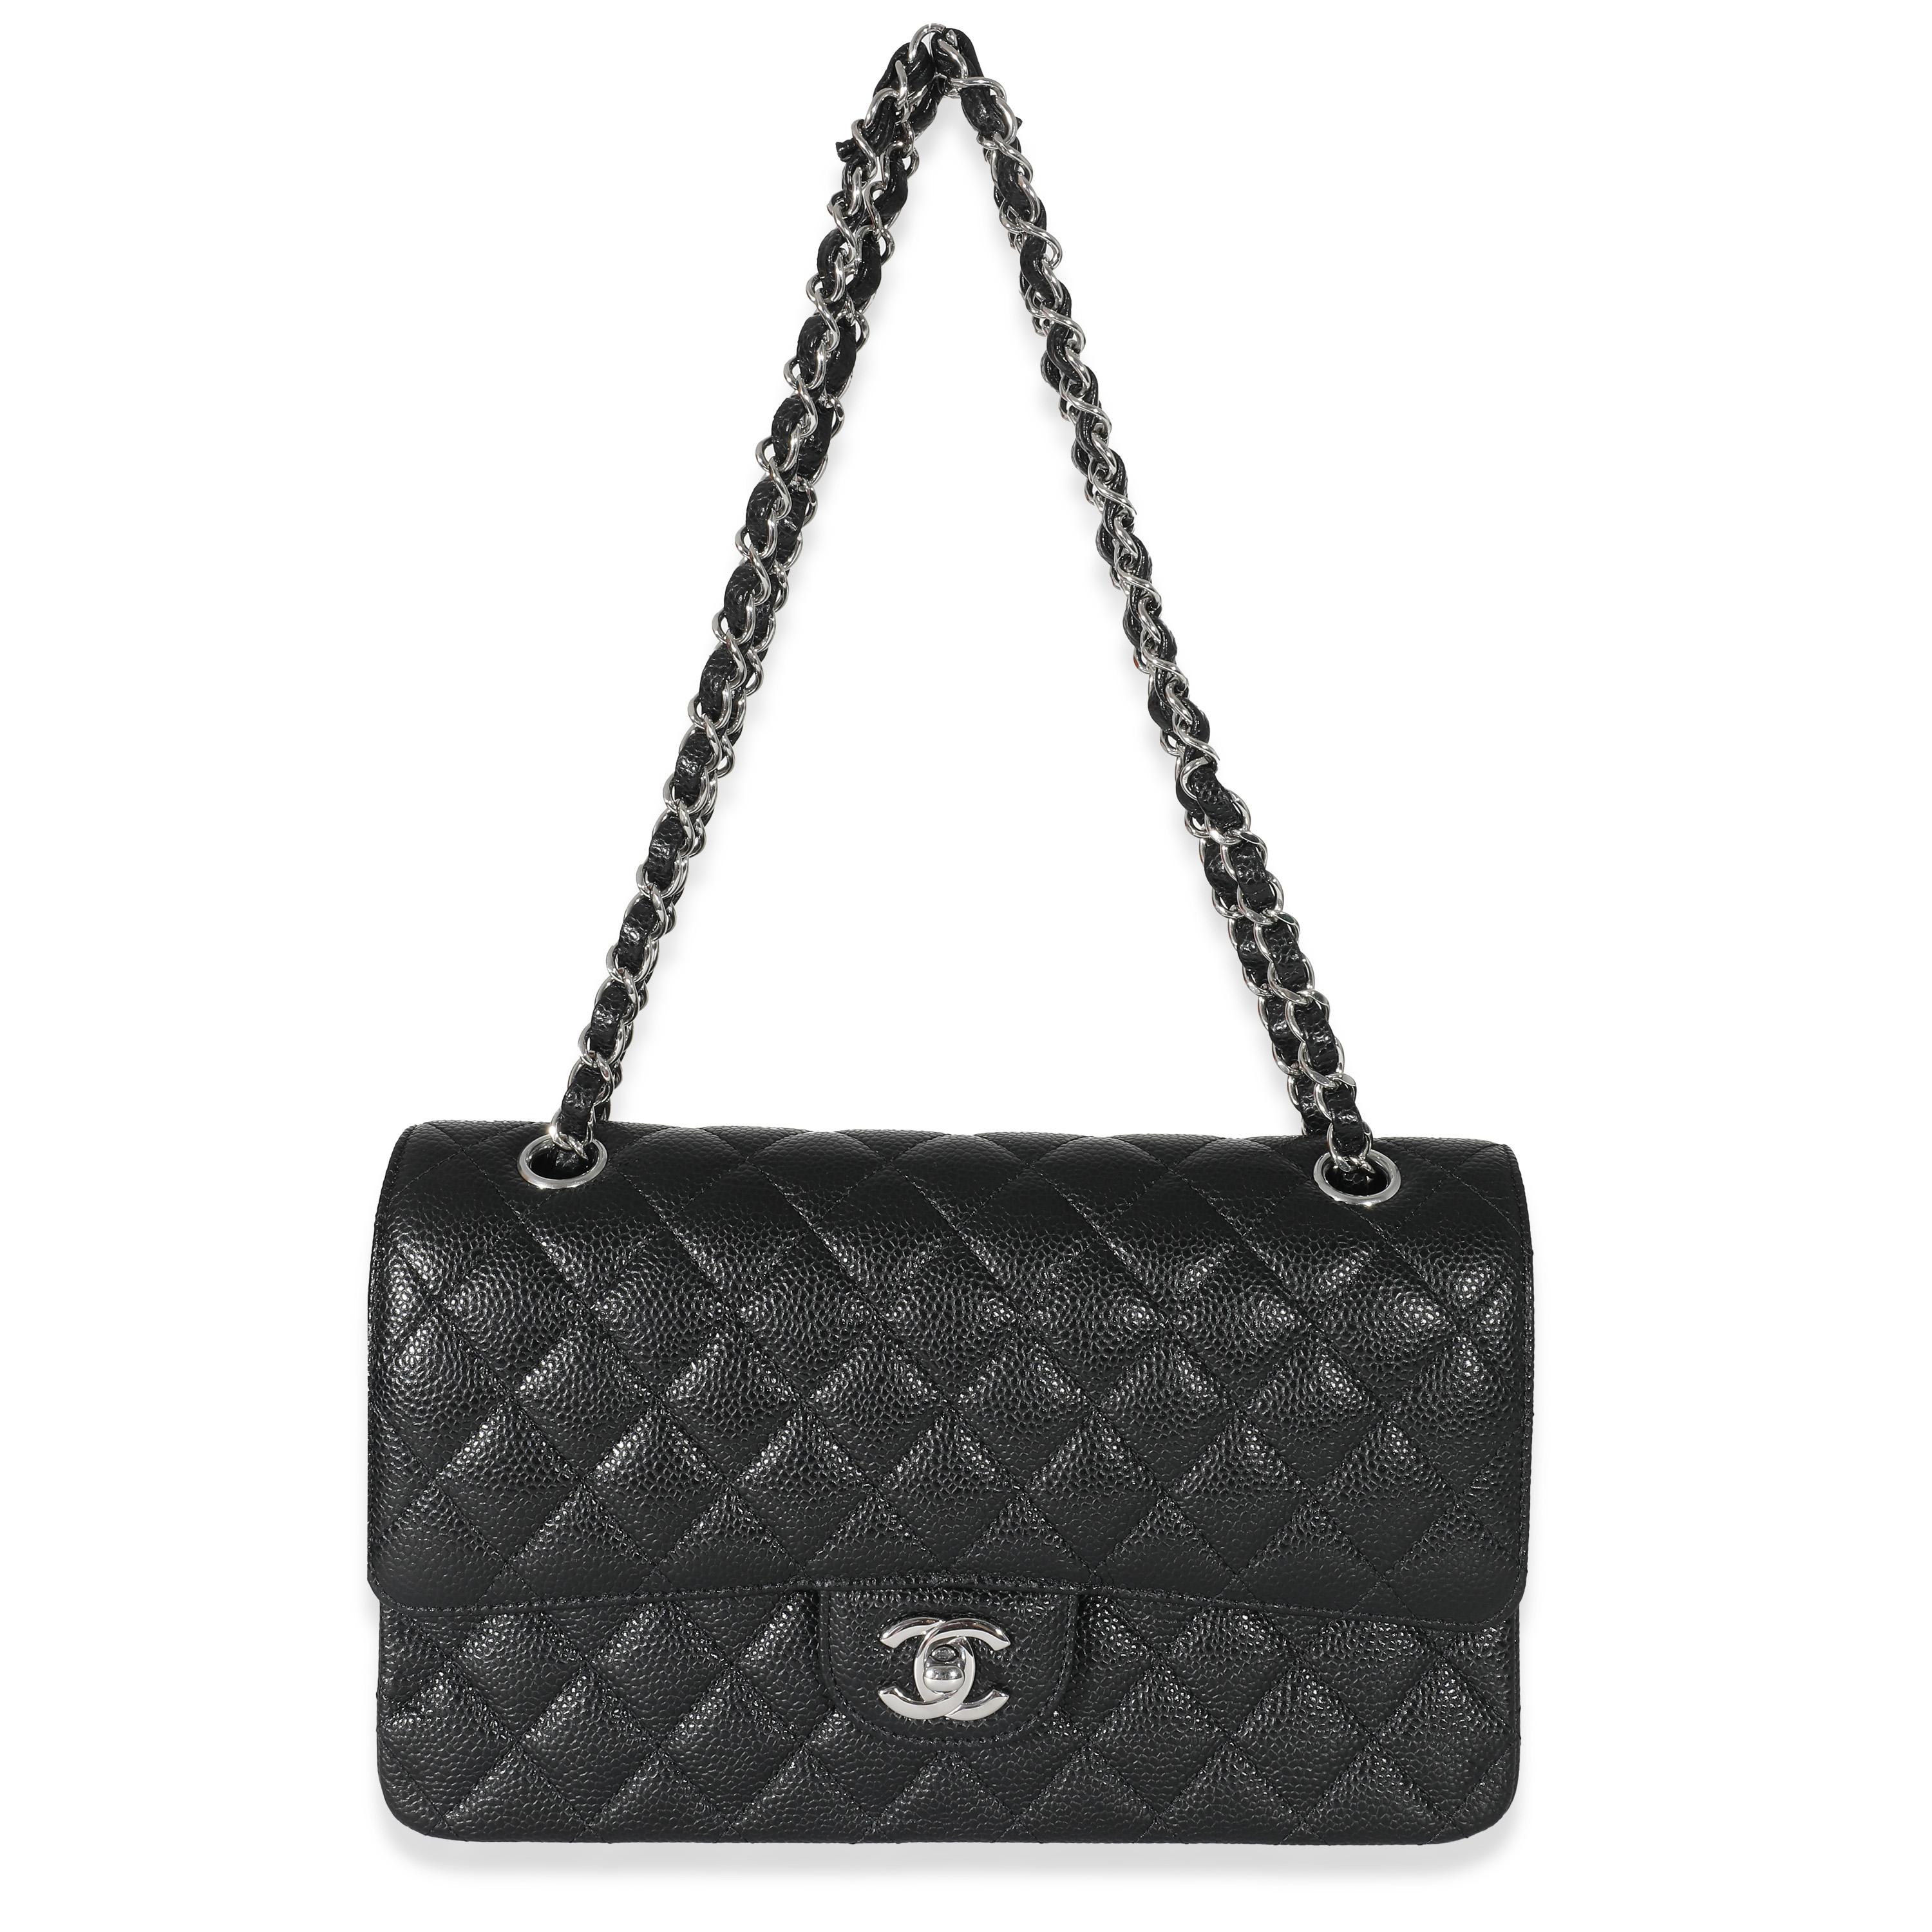 Listing Title: Chanel Black Caviar Medium Classic Double Flap Bag
SKU: 131428
MSRP: 10200.00 USD
Condition: Pre-owned 
Condition Description: A timeless classic that never goes out of style, the flap bag from Chanel dates back to 1955 and has seen a